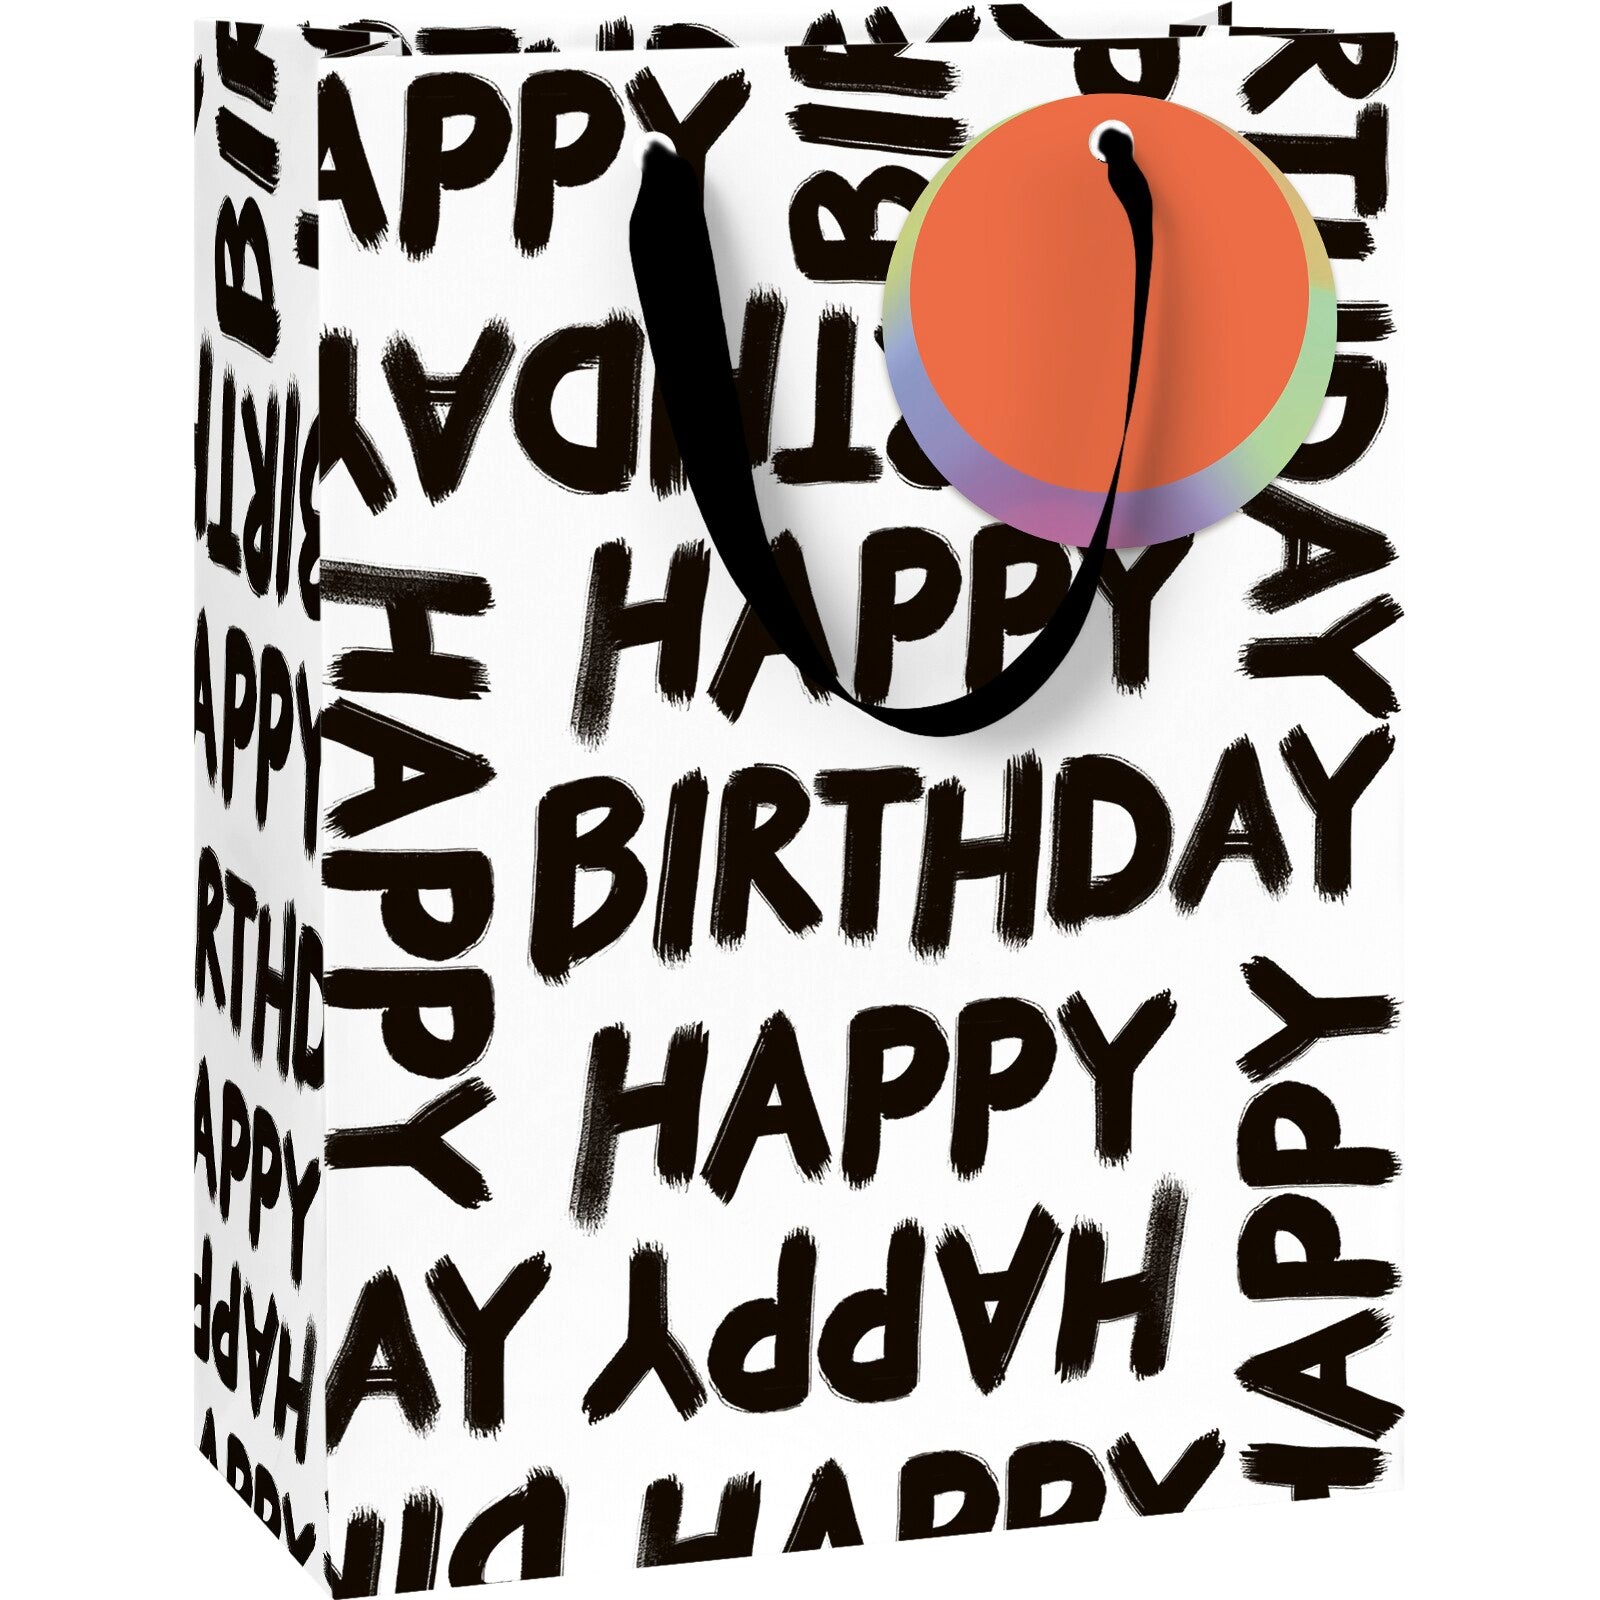 Forby Birthday Graffiti Large Gift Bag by penny black